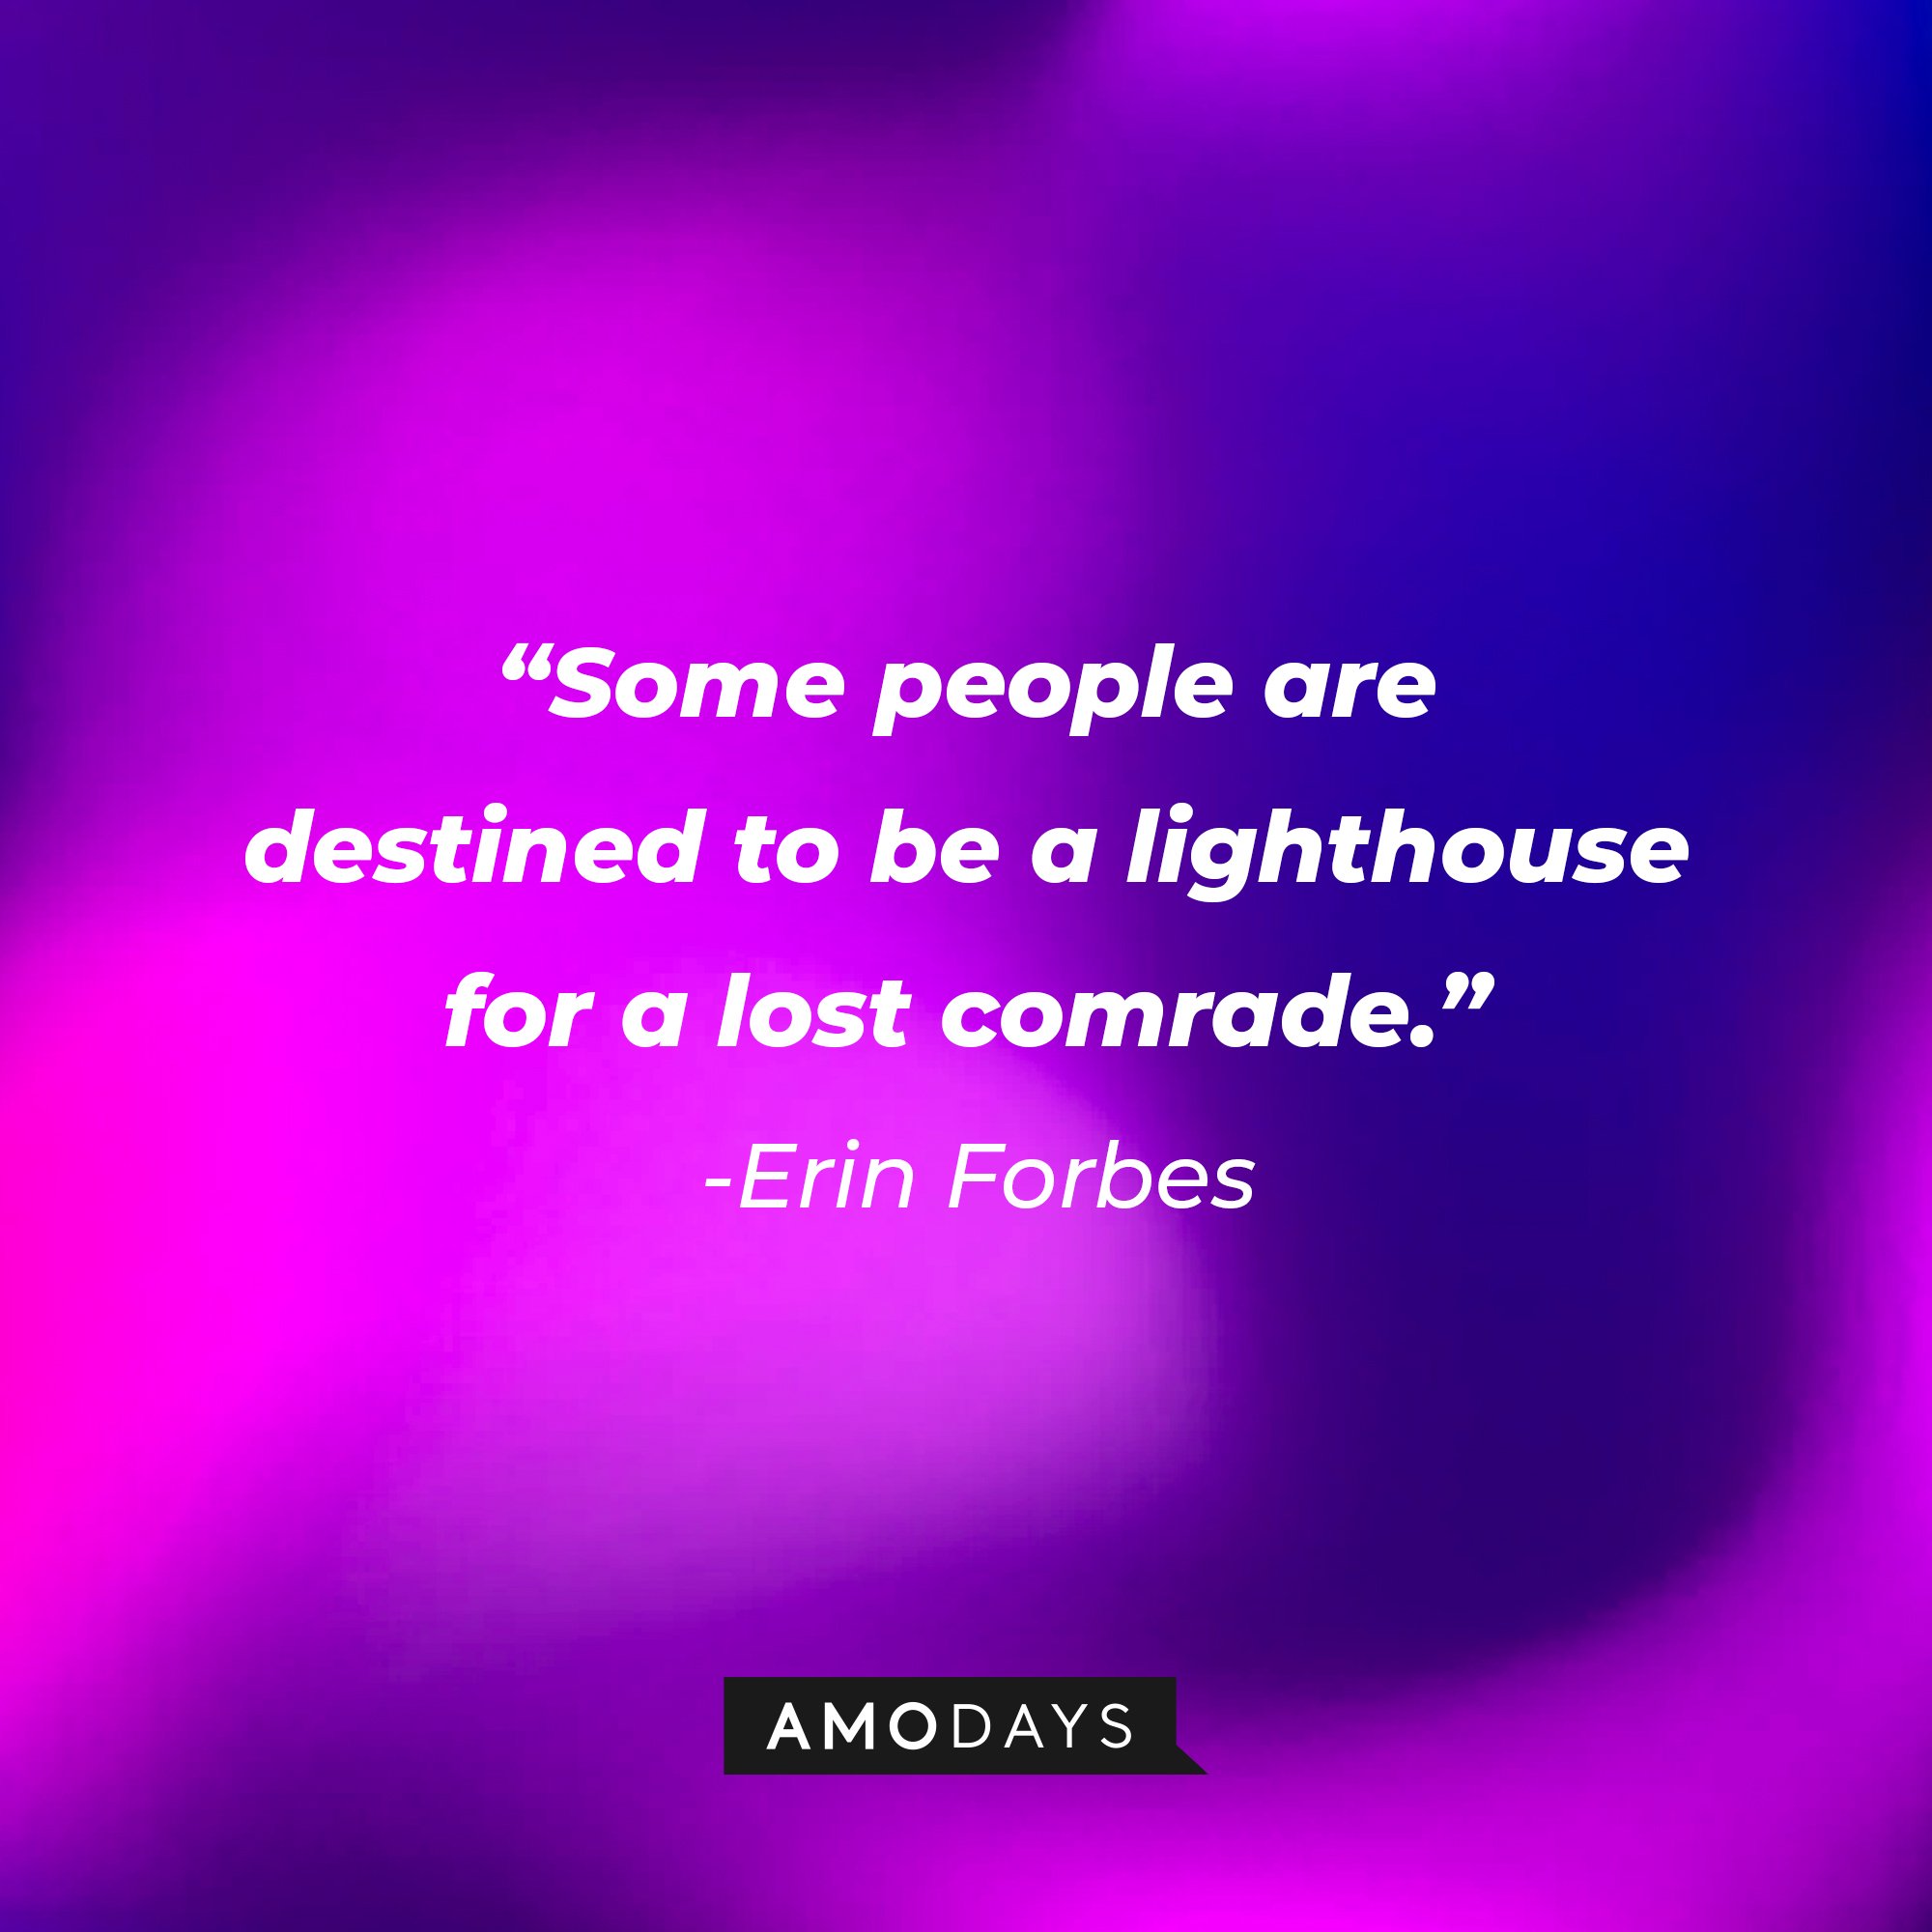 Erin Forbes’ quote: “Some people are destined to be a lighthouse for a lost comrade.” | Image: AmoDays  